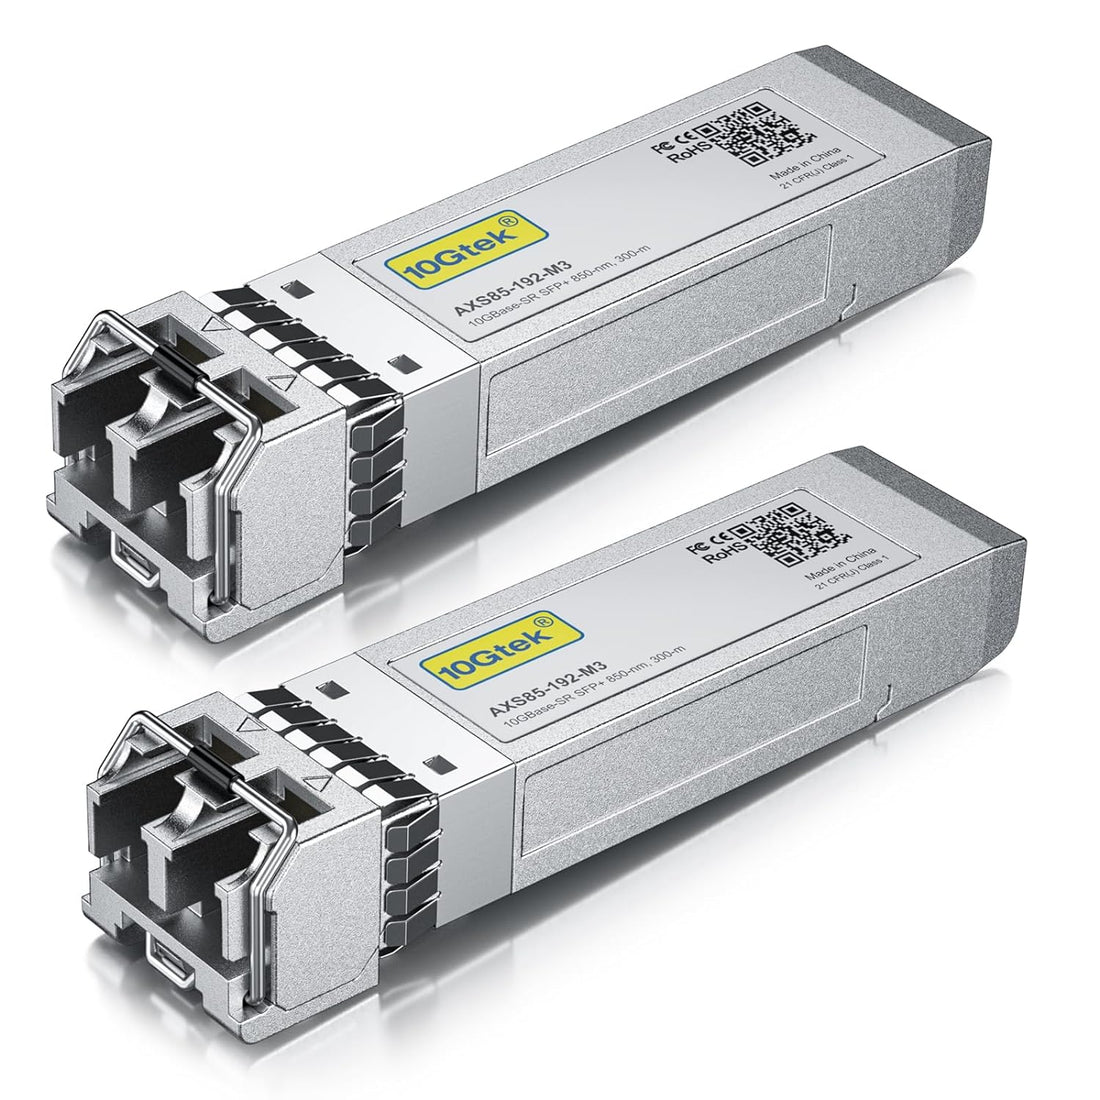 10GBase-SR SFP+ Transceiver, 10G 850nm MMF, up to 300 Meters, Compatible with Cisco SFP-10G-SR, Meraki MA-SFP-10GB-SR, Ubiquiti UF-MM-10G, Mikrotik, Netgear and More, Pack of 2